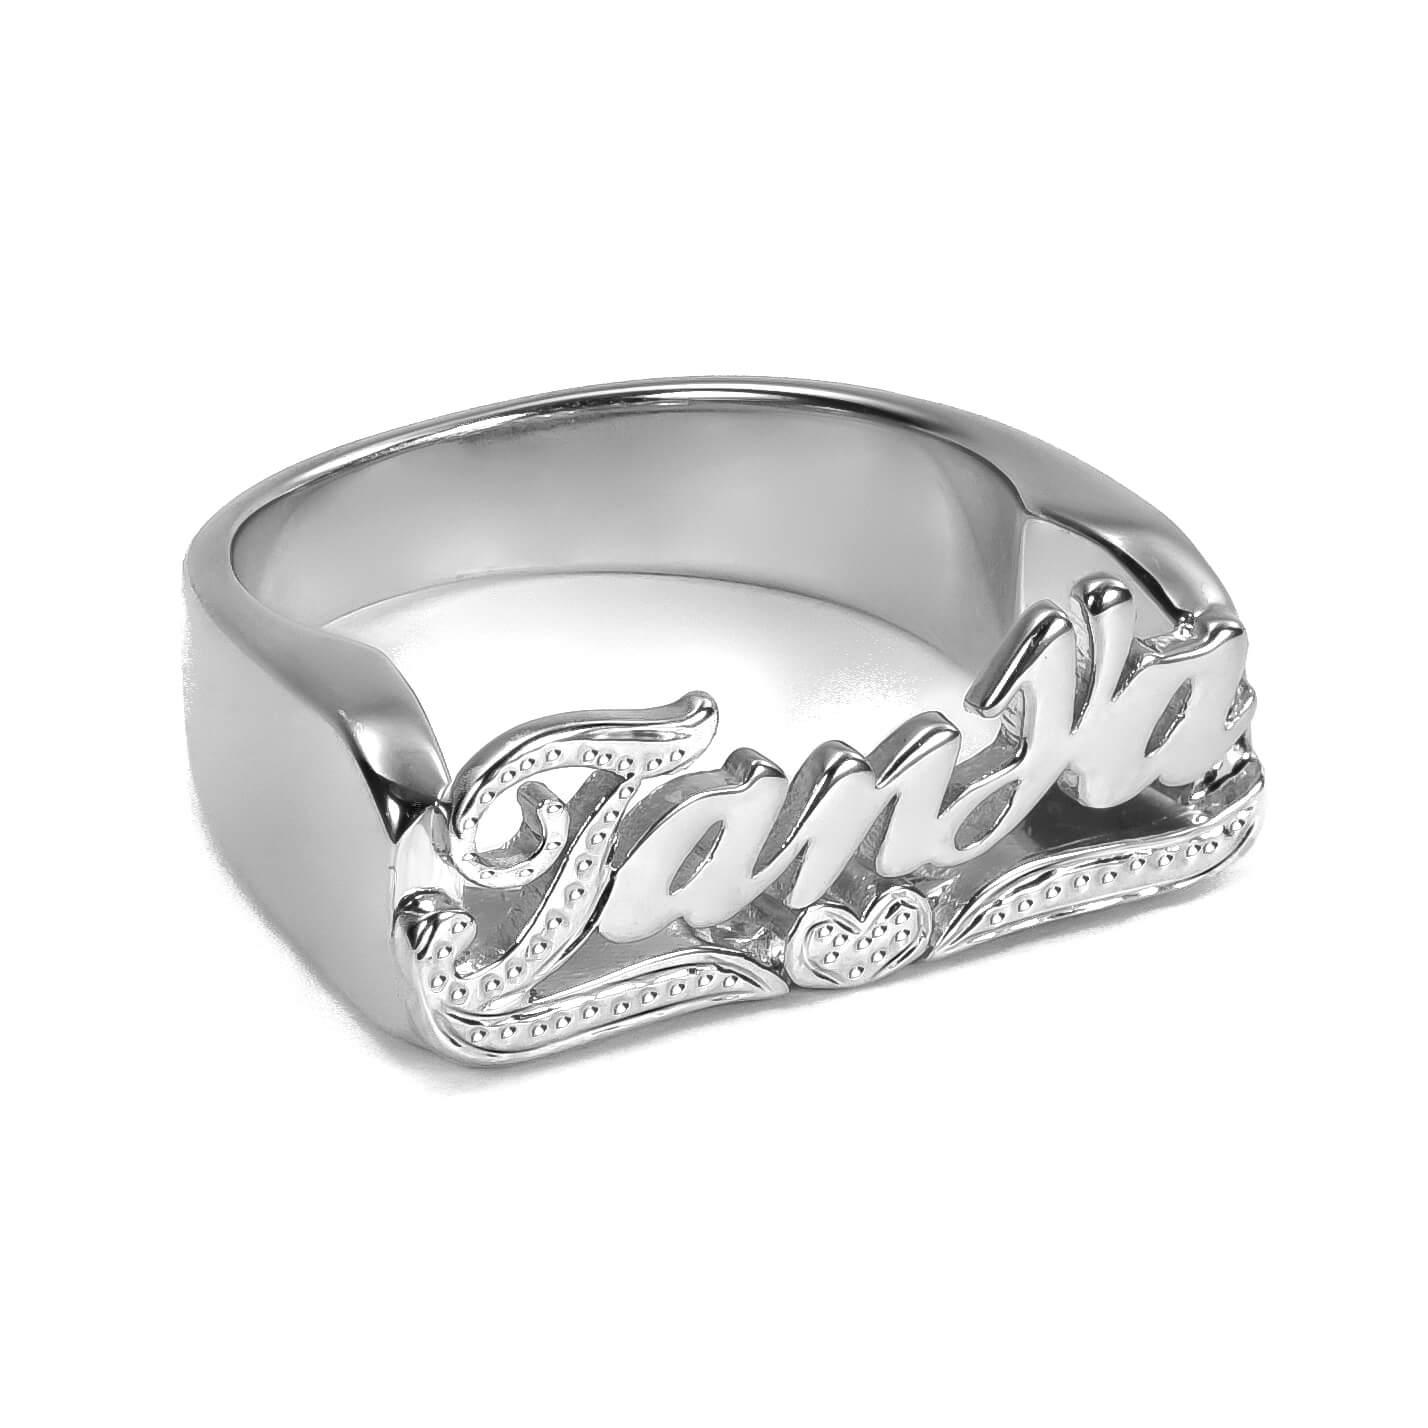 Two Tone Personalized Name Ring with Heart